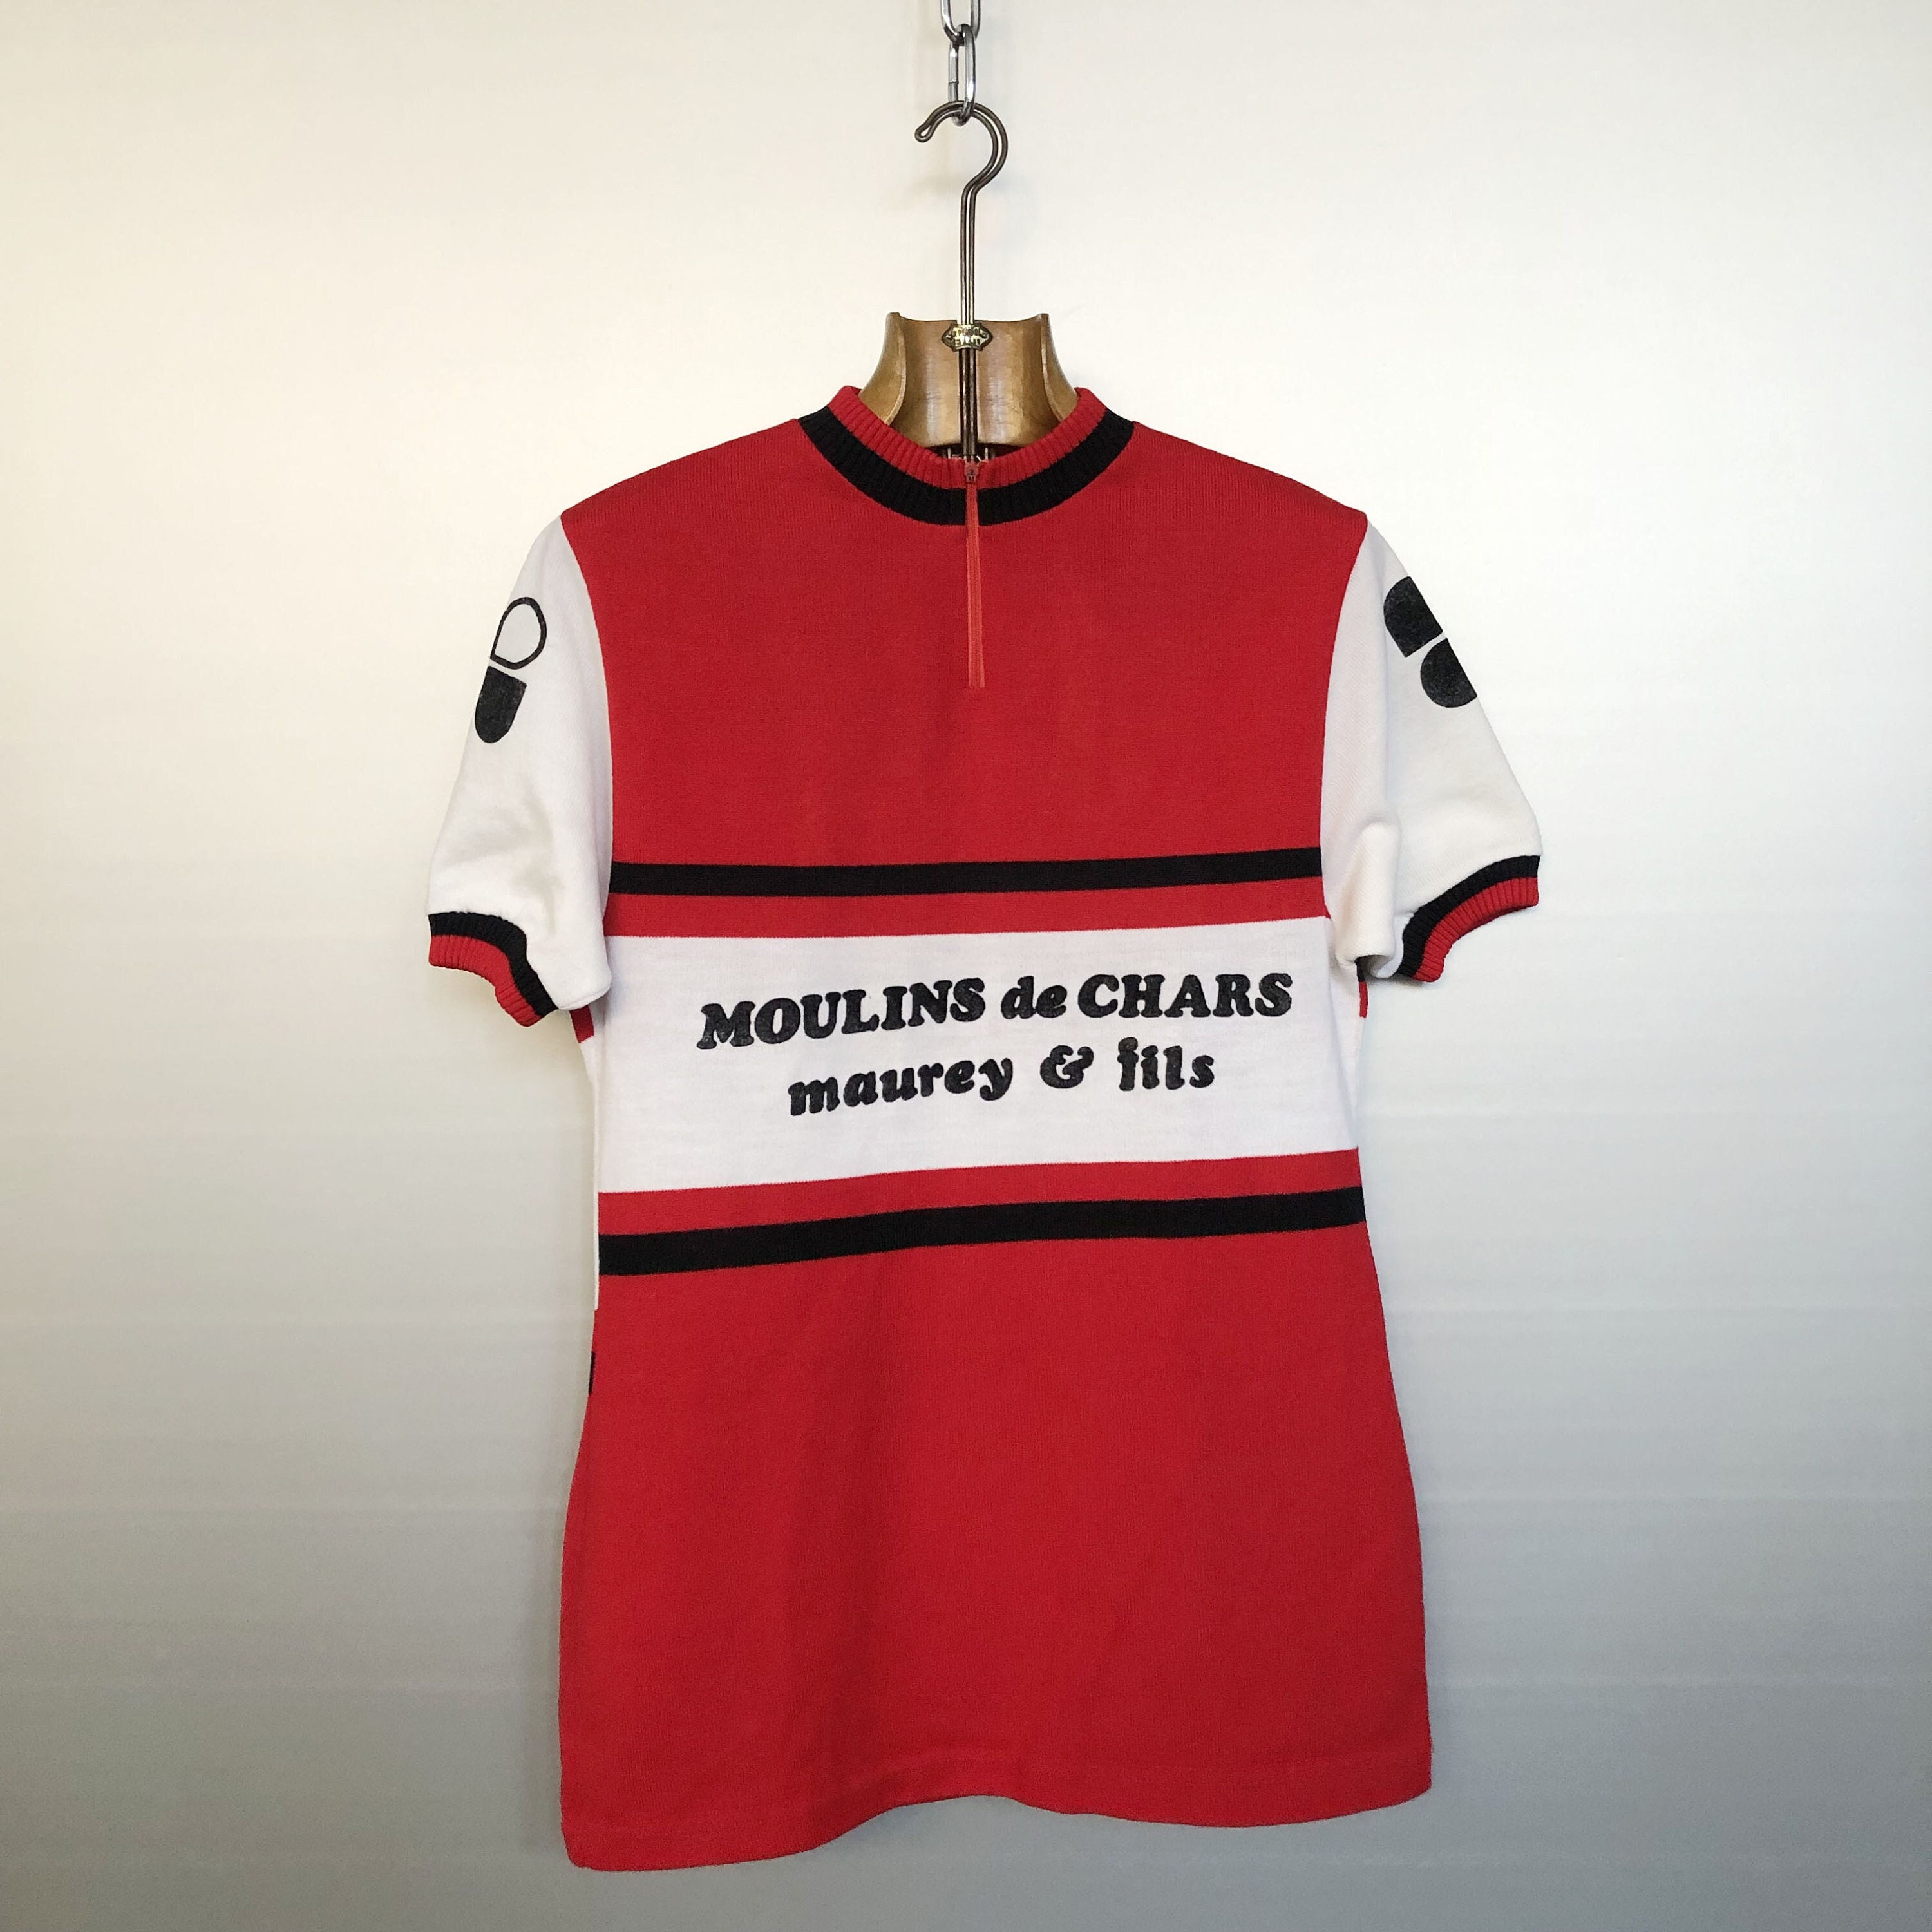 Vintage 70s Cycling Jersey in Red Mesh Vintage Cycling Jersey 